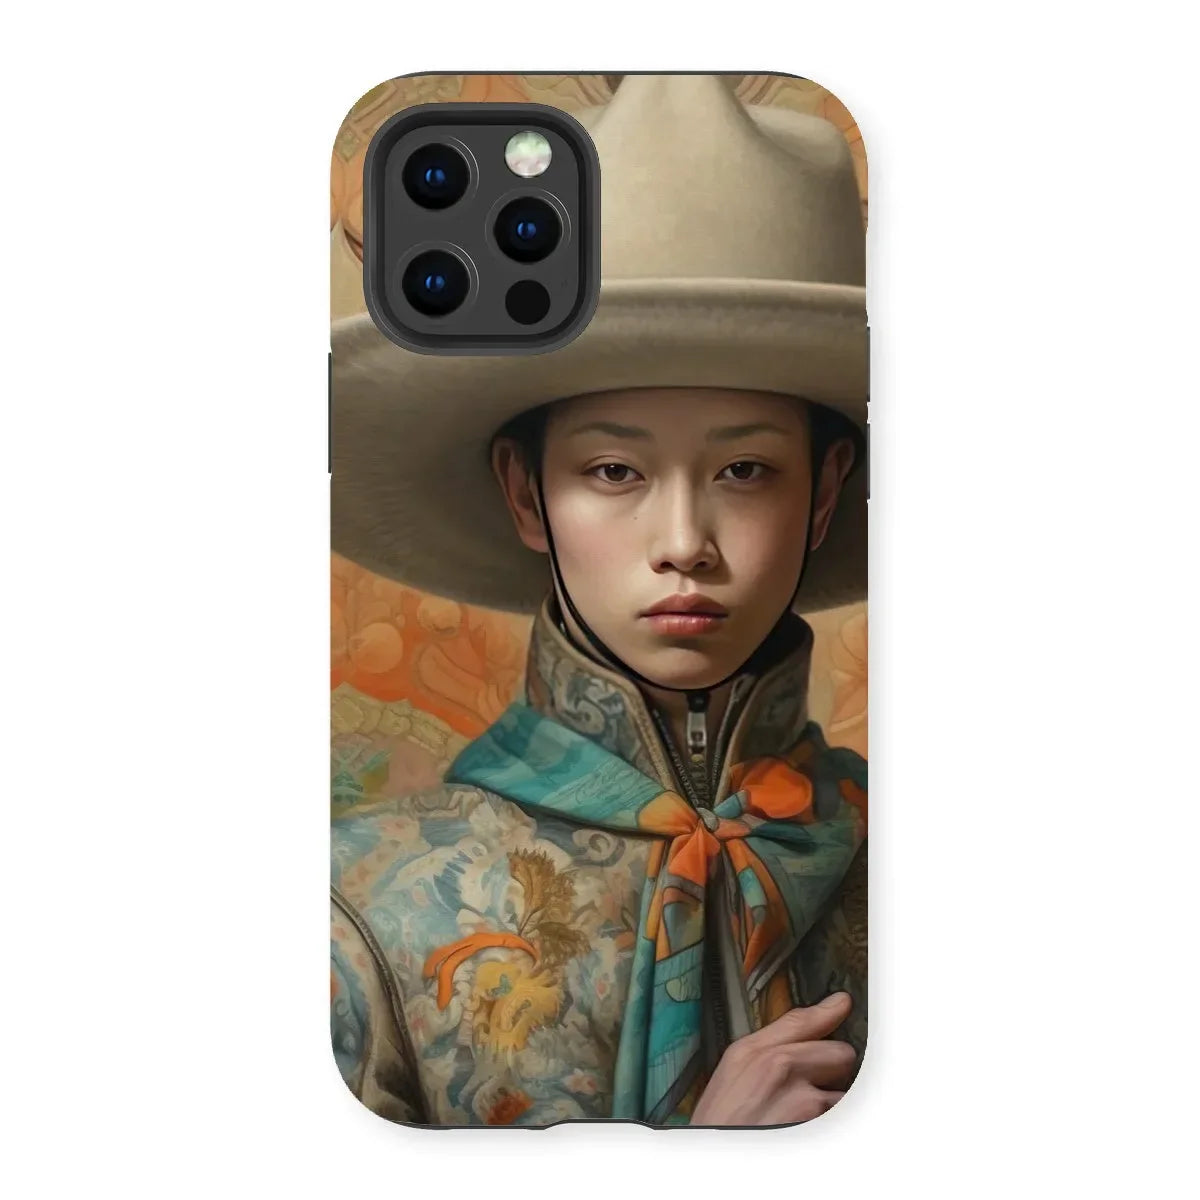 Xiang - Gaysian Chinese Cowboy Aesthetic Art Phone Case - Iphone 13 Pro / Matte - Mobile Phone Cases - Aesthetic Art